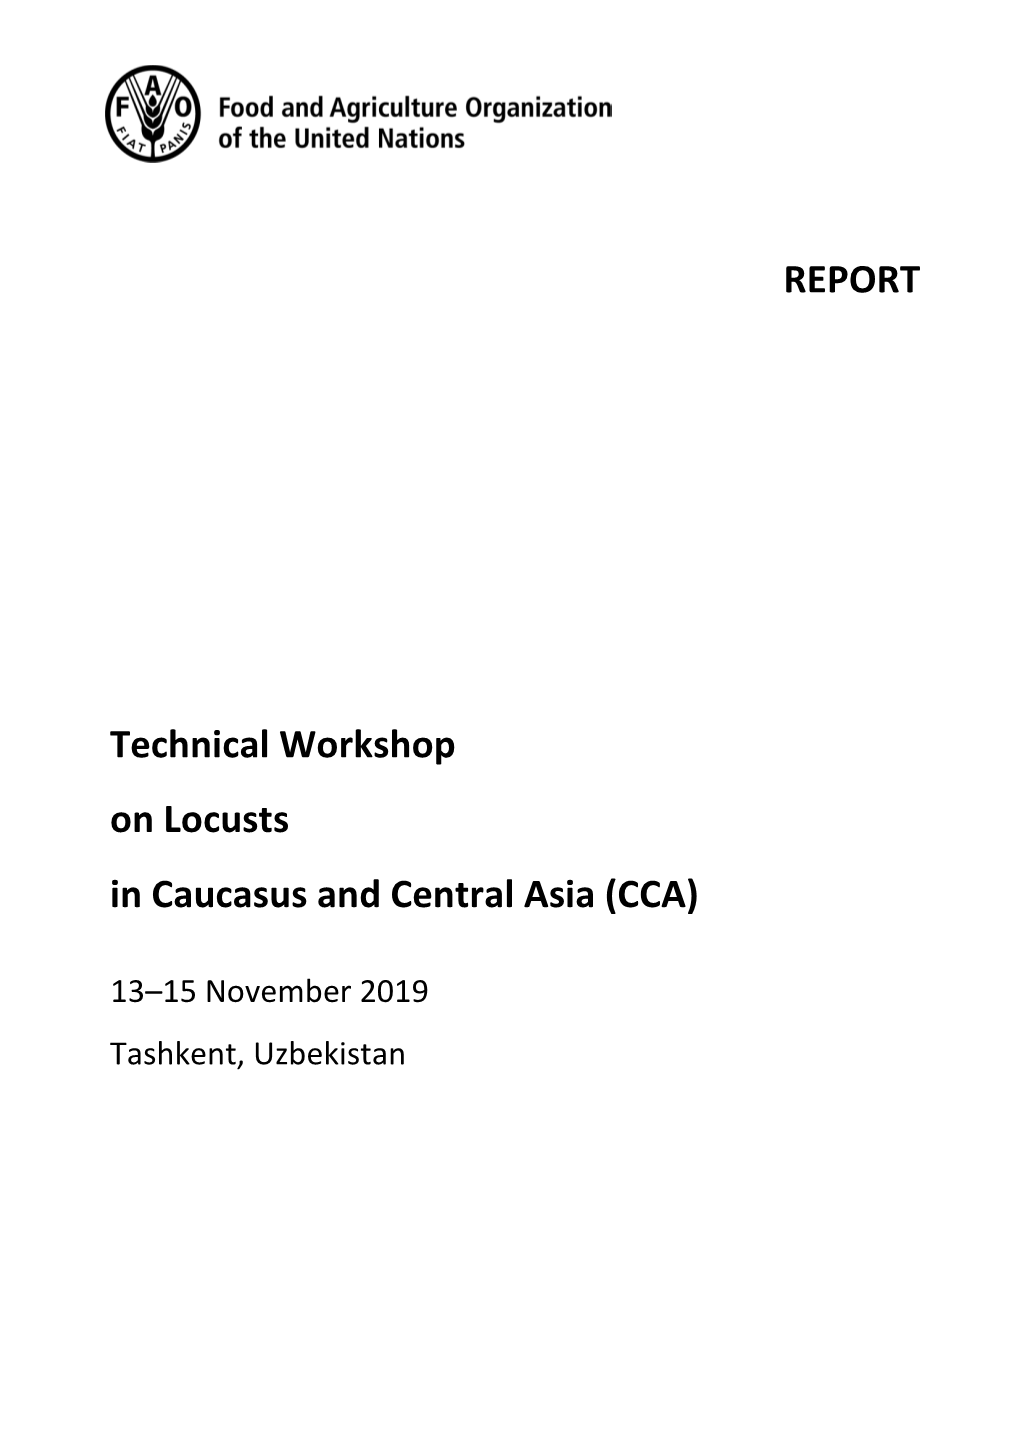 Technical Workshop on Locusts in Caucasus and Central Asia (CCA)